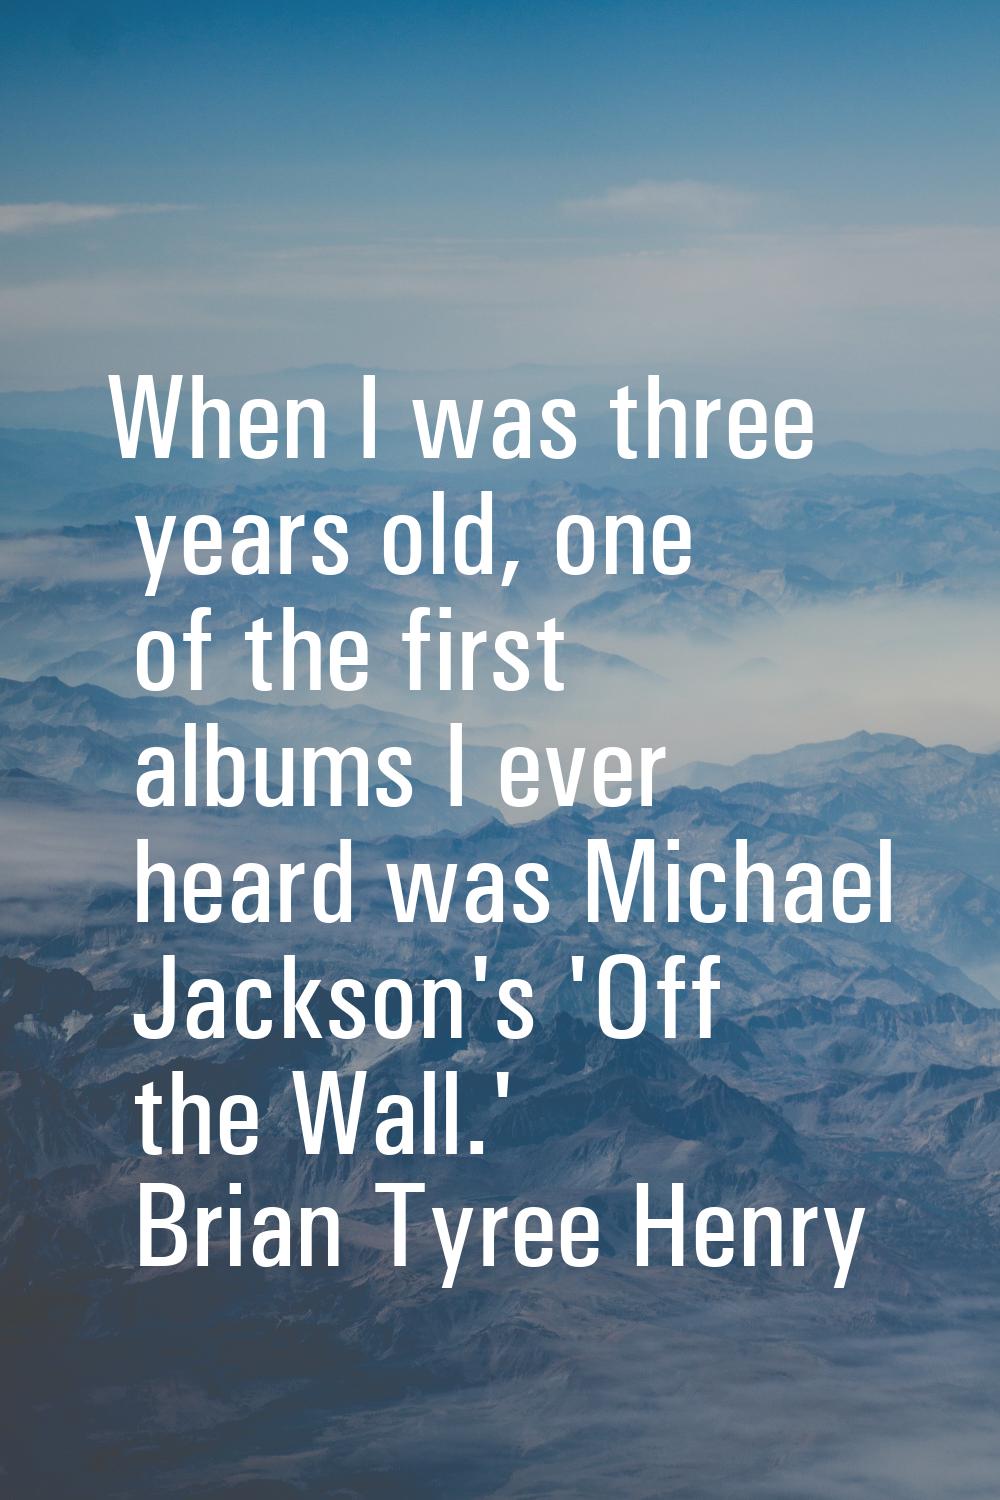 When I was three years old, one of the first albums I ever heard was Michael Jackson's 'Off the Wal